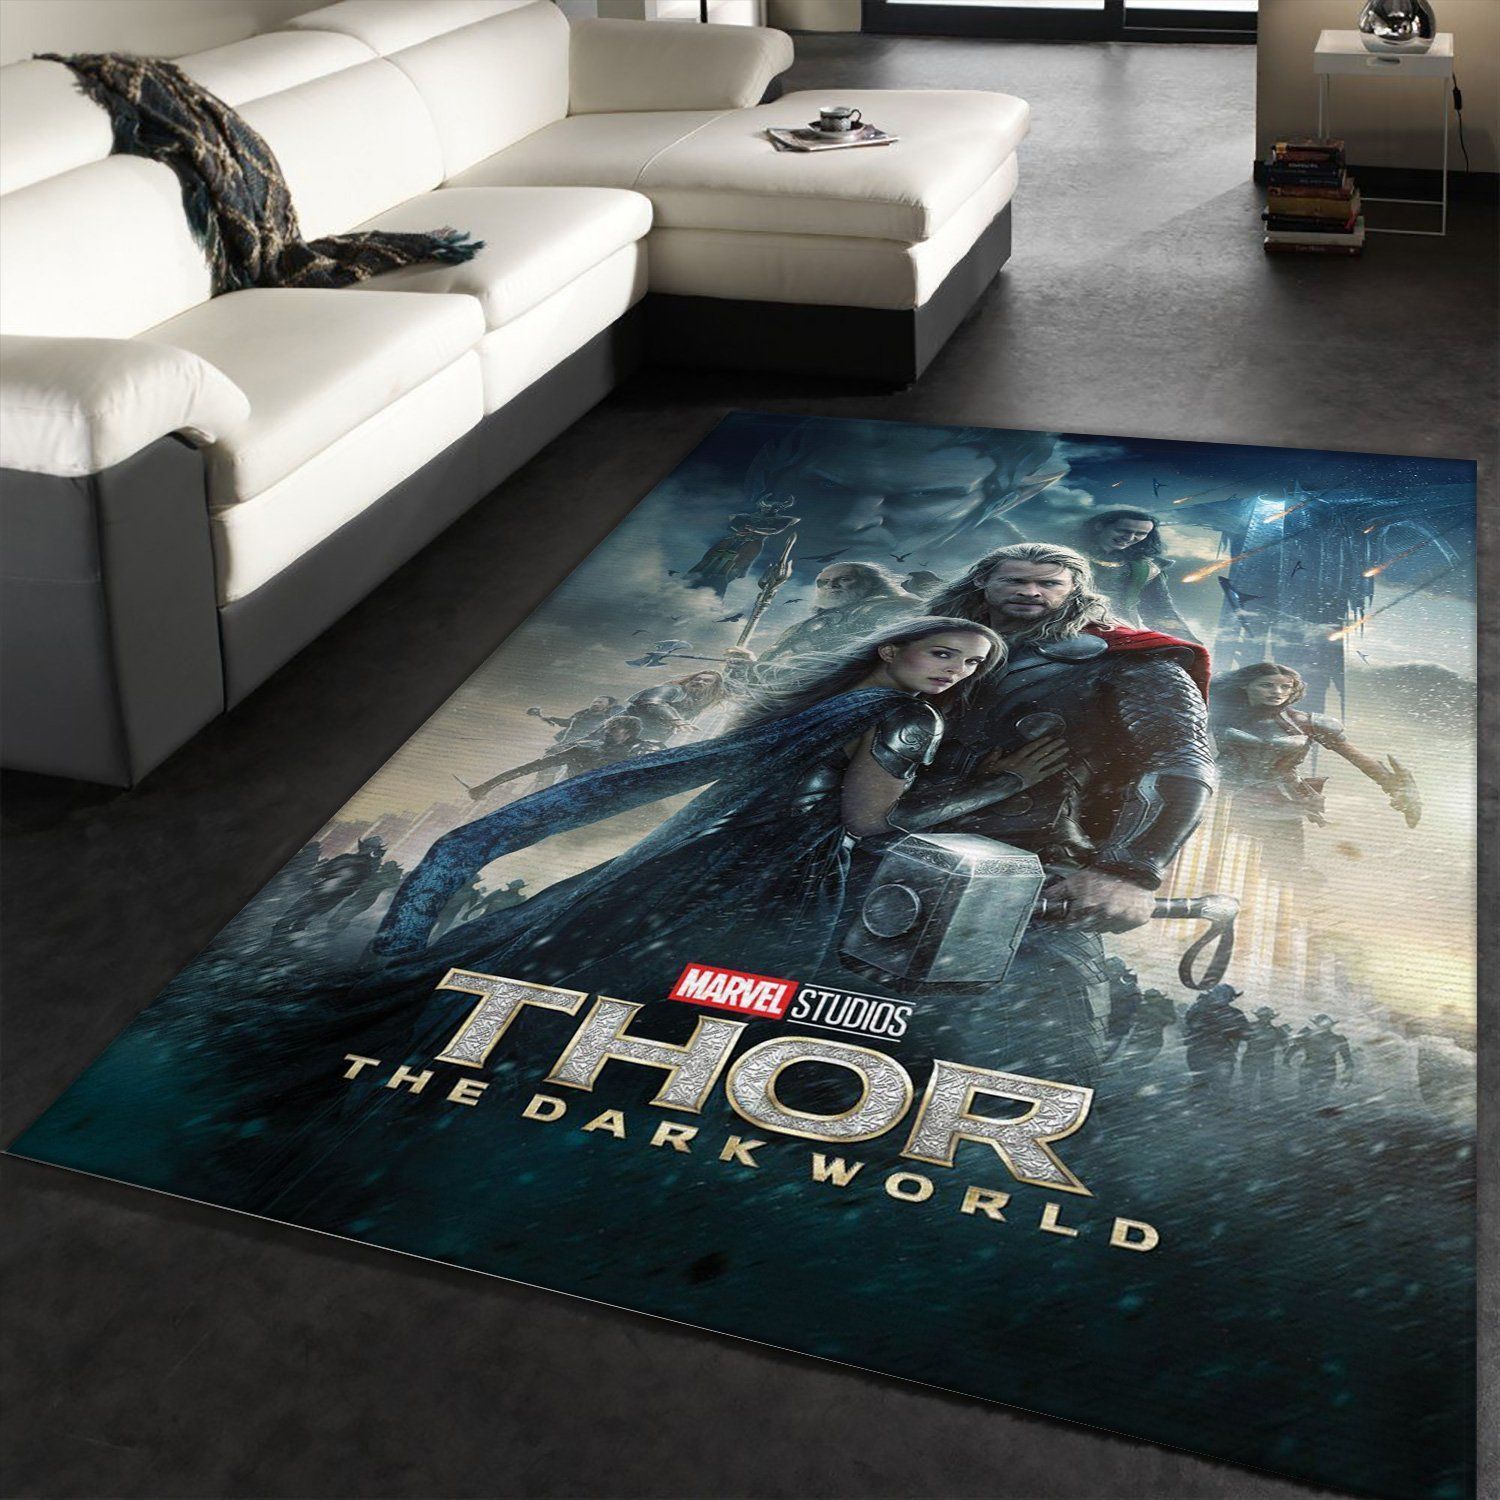 Thor The Dark World Movie Area Rug For Christmas, Kitchen Rug, Home Decor Floor Decor - Indoor Outdoor Rugs